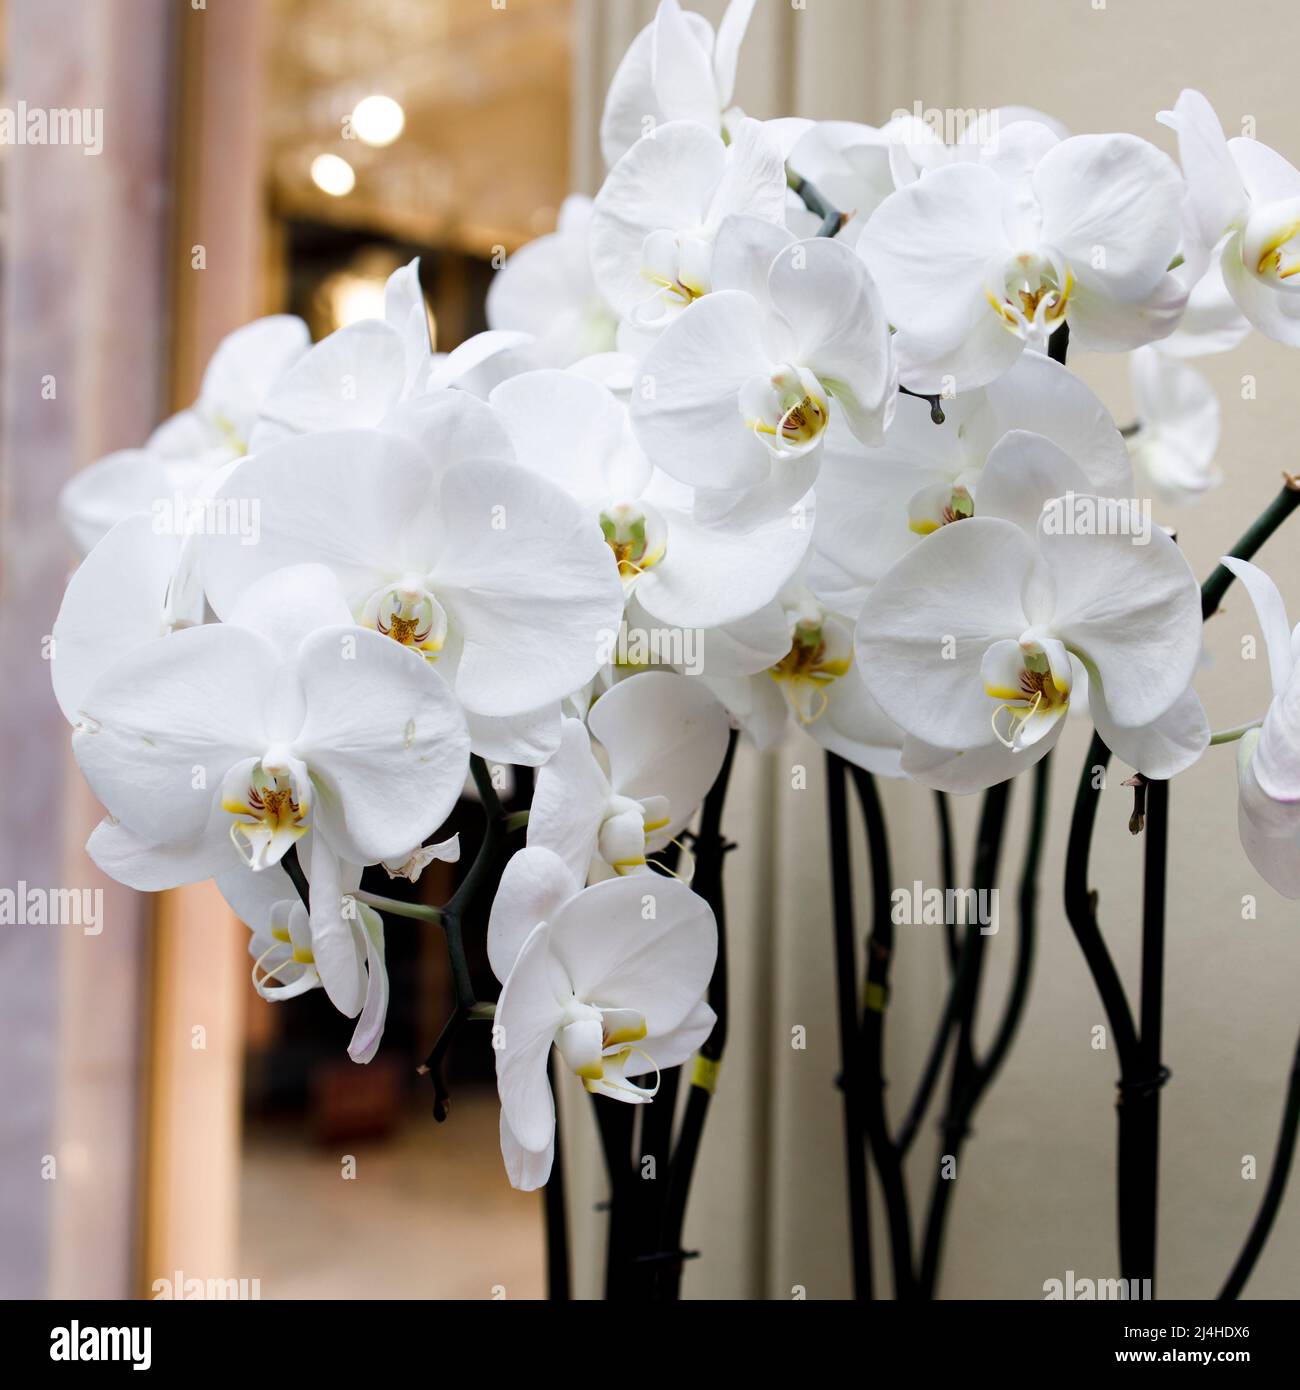 White orchid flower phalaenopsis, phalaenopsis or falah on a white background. Purple phalaenopsis flowers on the right. known as butterfly orchids. S Stock Photo